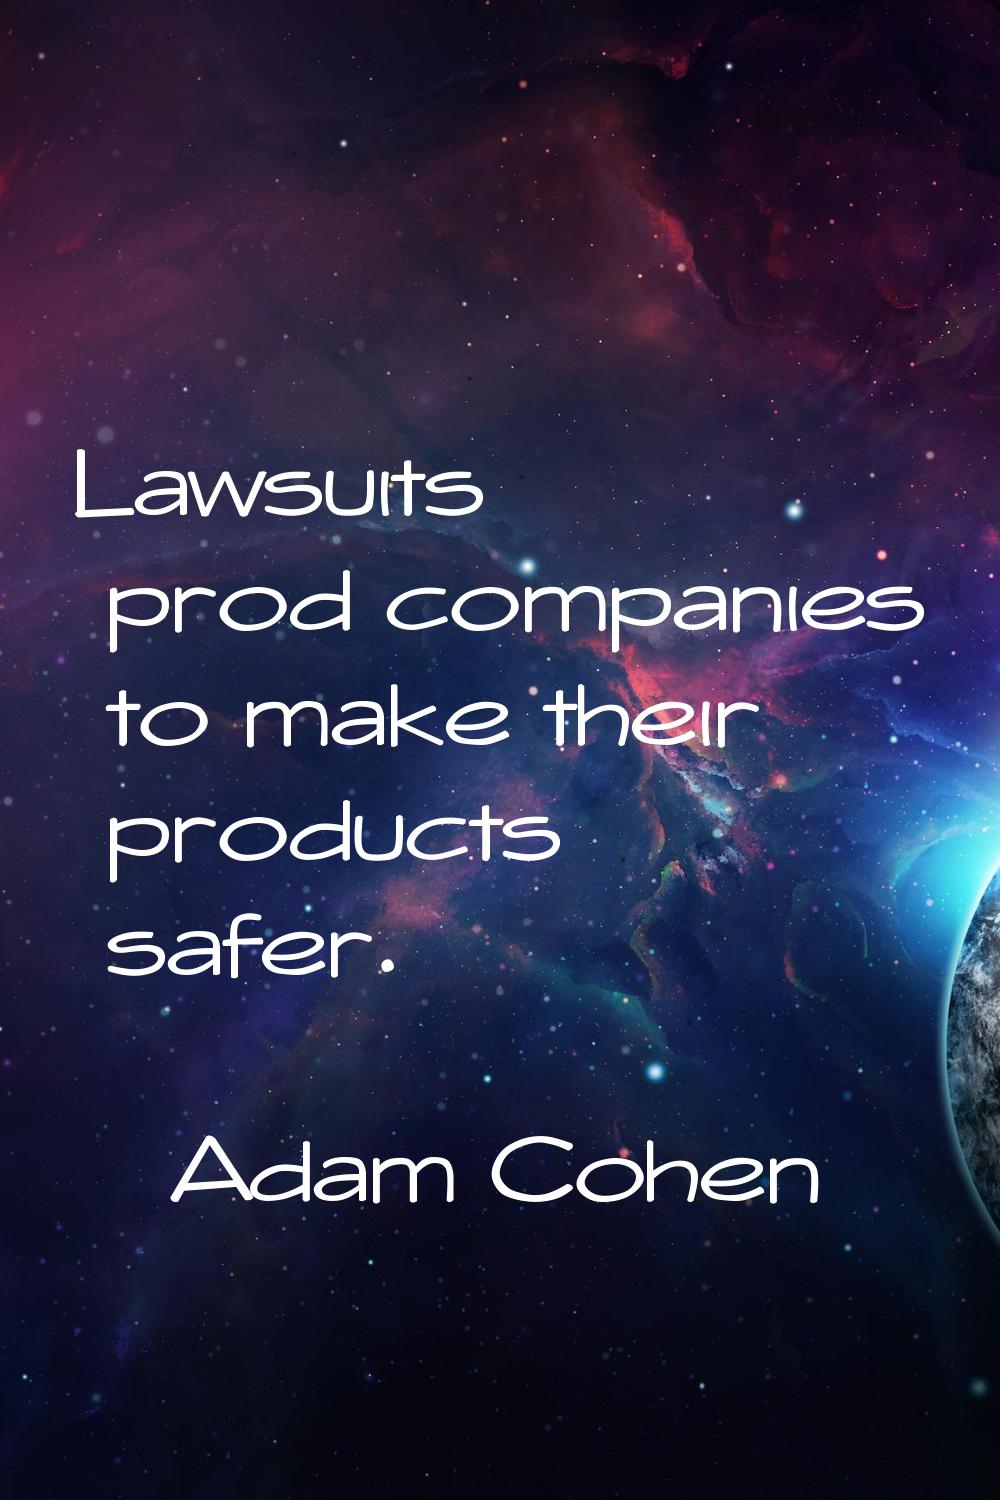 Lawsuits prod companies to make their products safer.